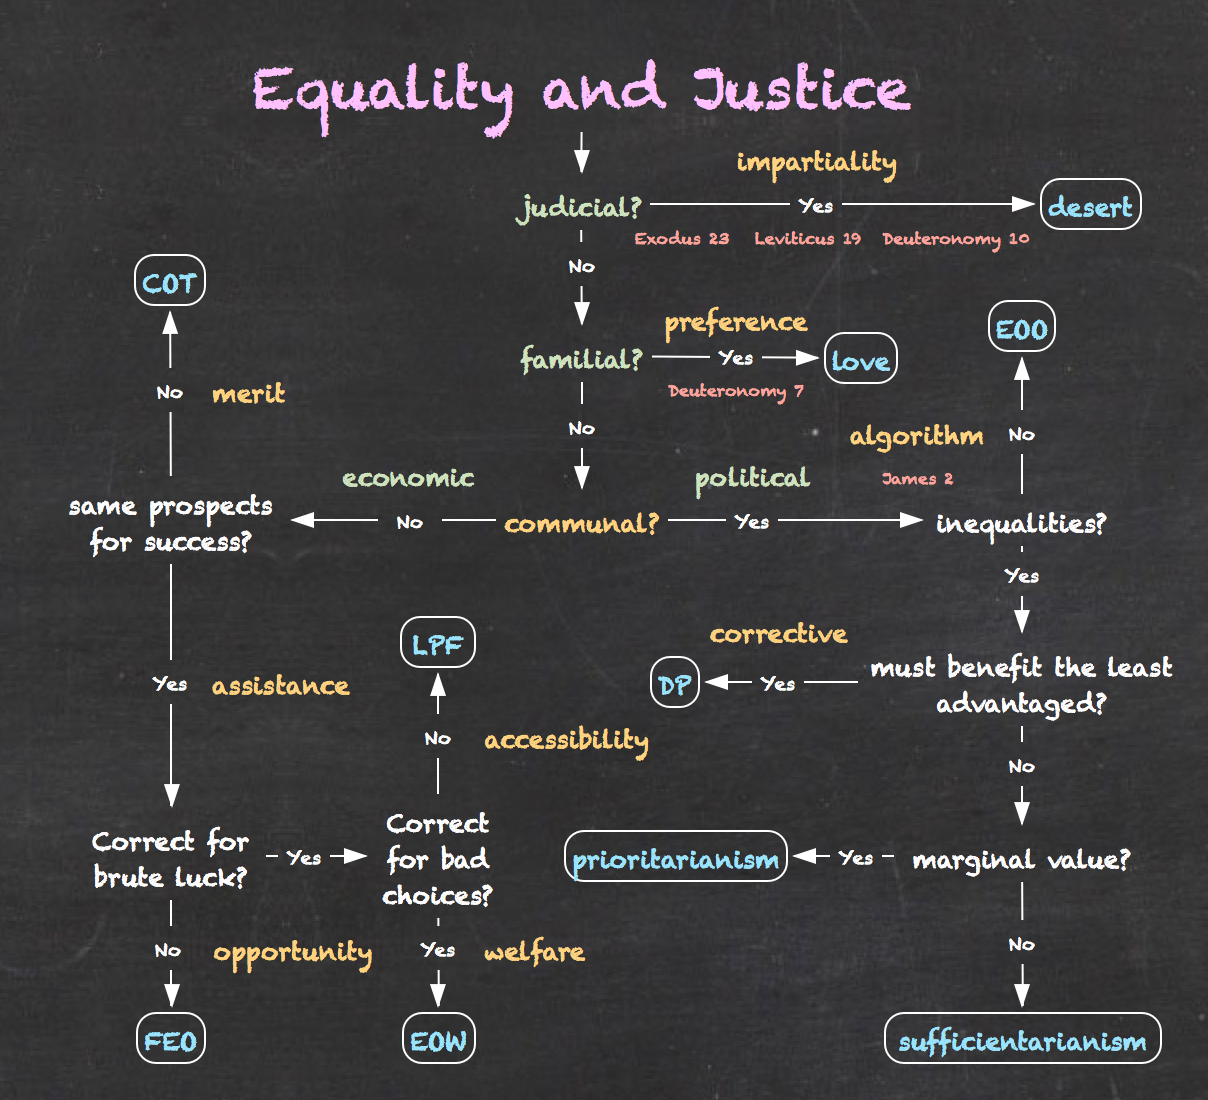 Equality and Justice: The Flowchart